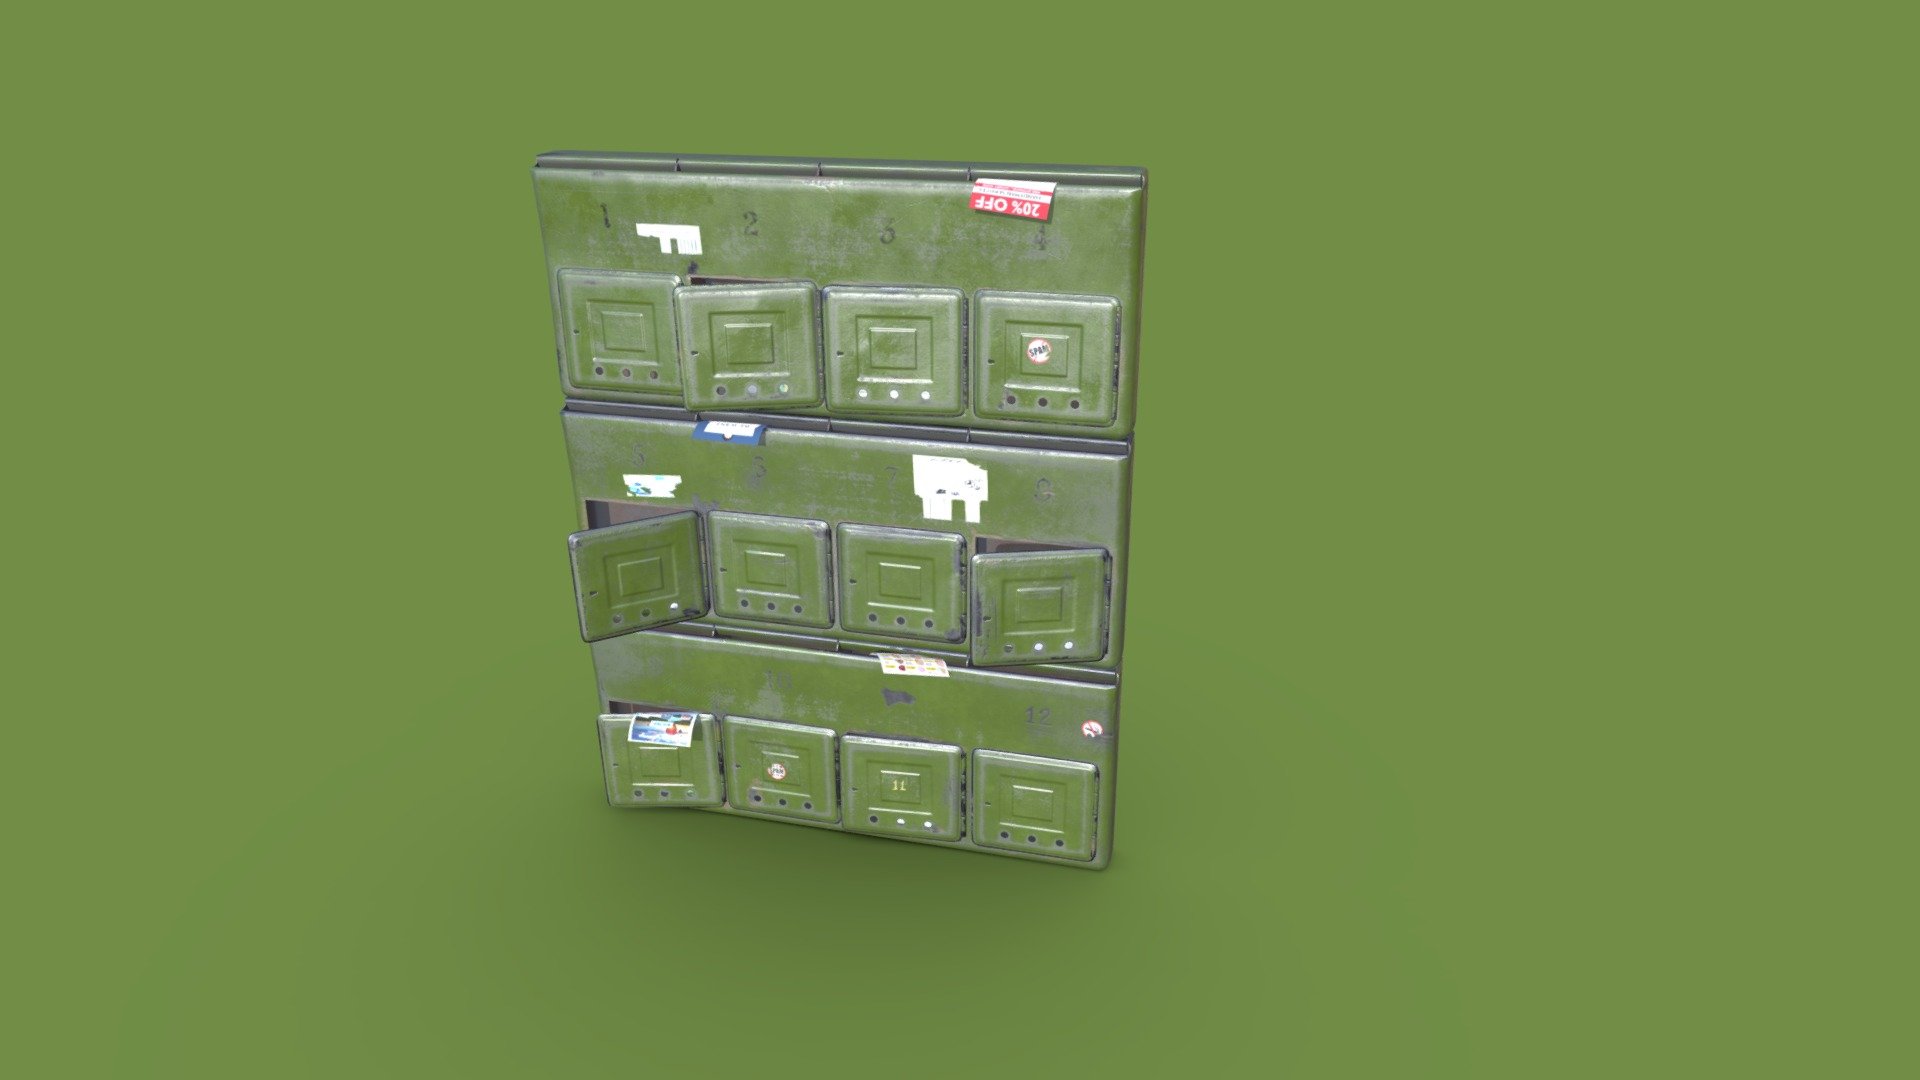 Old Post Boxes


Includes 3 models.
Models are Game-Ready/VR ready.
Models are UV mapped and unwrapped (non overlapping for Unreal, mixed for Unity).
Assets are fully textured, 2048x2048 .png’s. Textures for PBR MetalRough setup.
Models are ready for Unity and Unreal game engines.
File Formats: .FBX

Additional zip file contains all the files 3d model